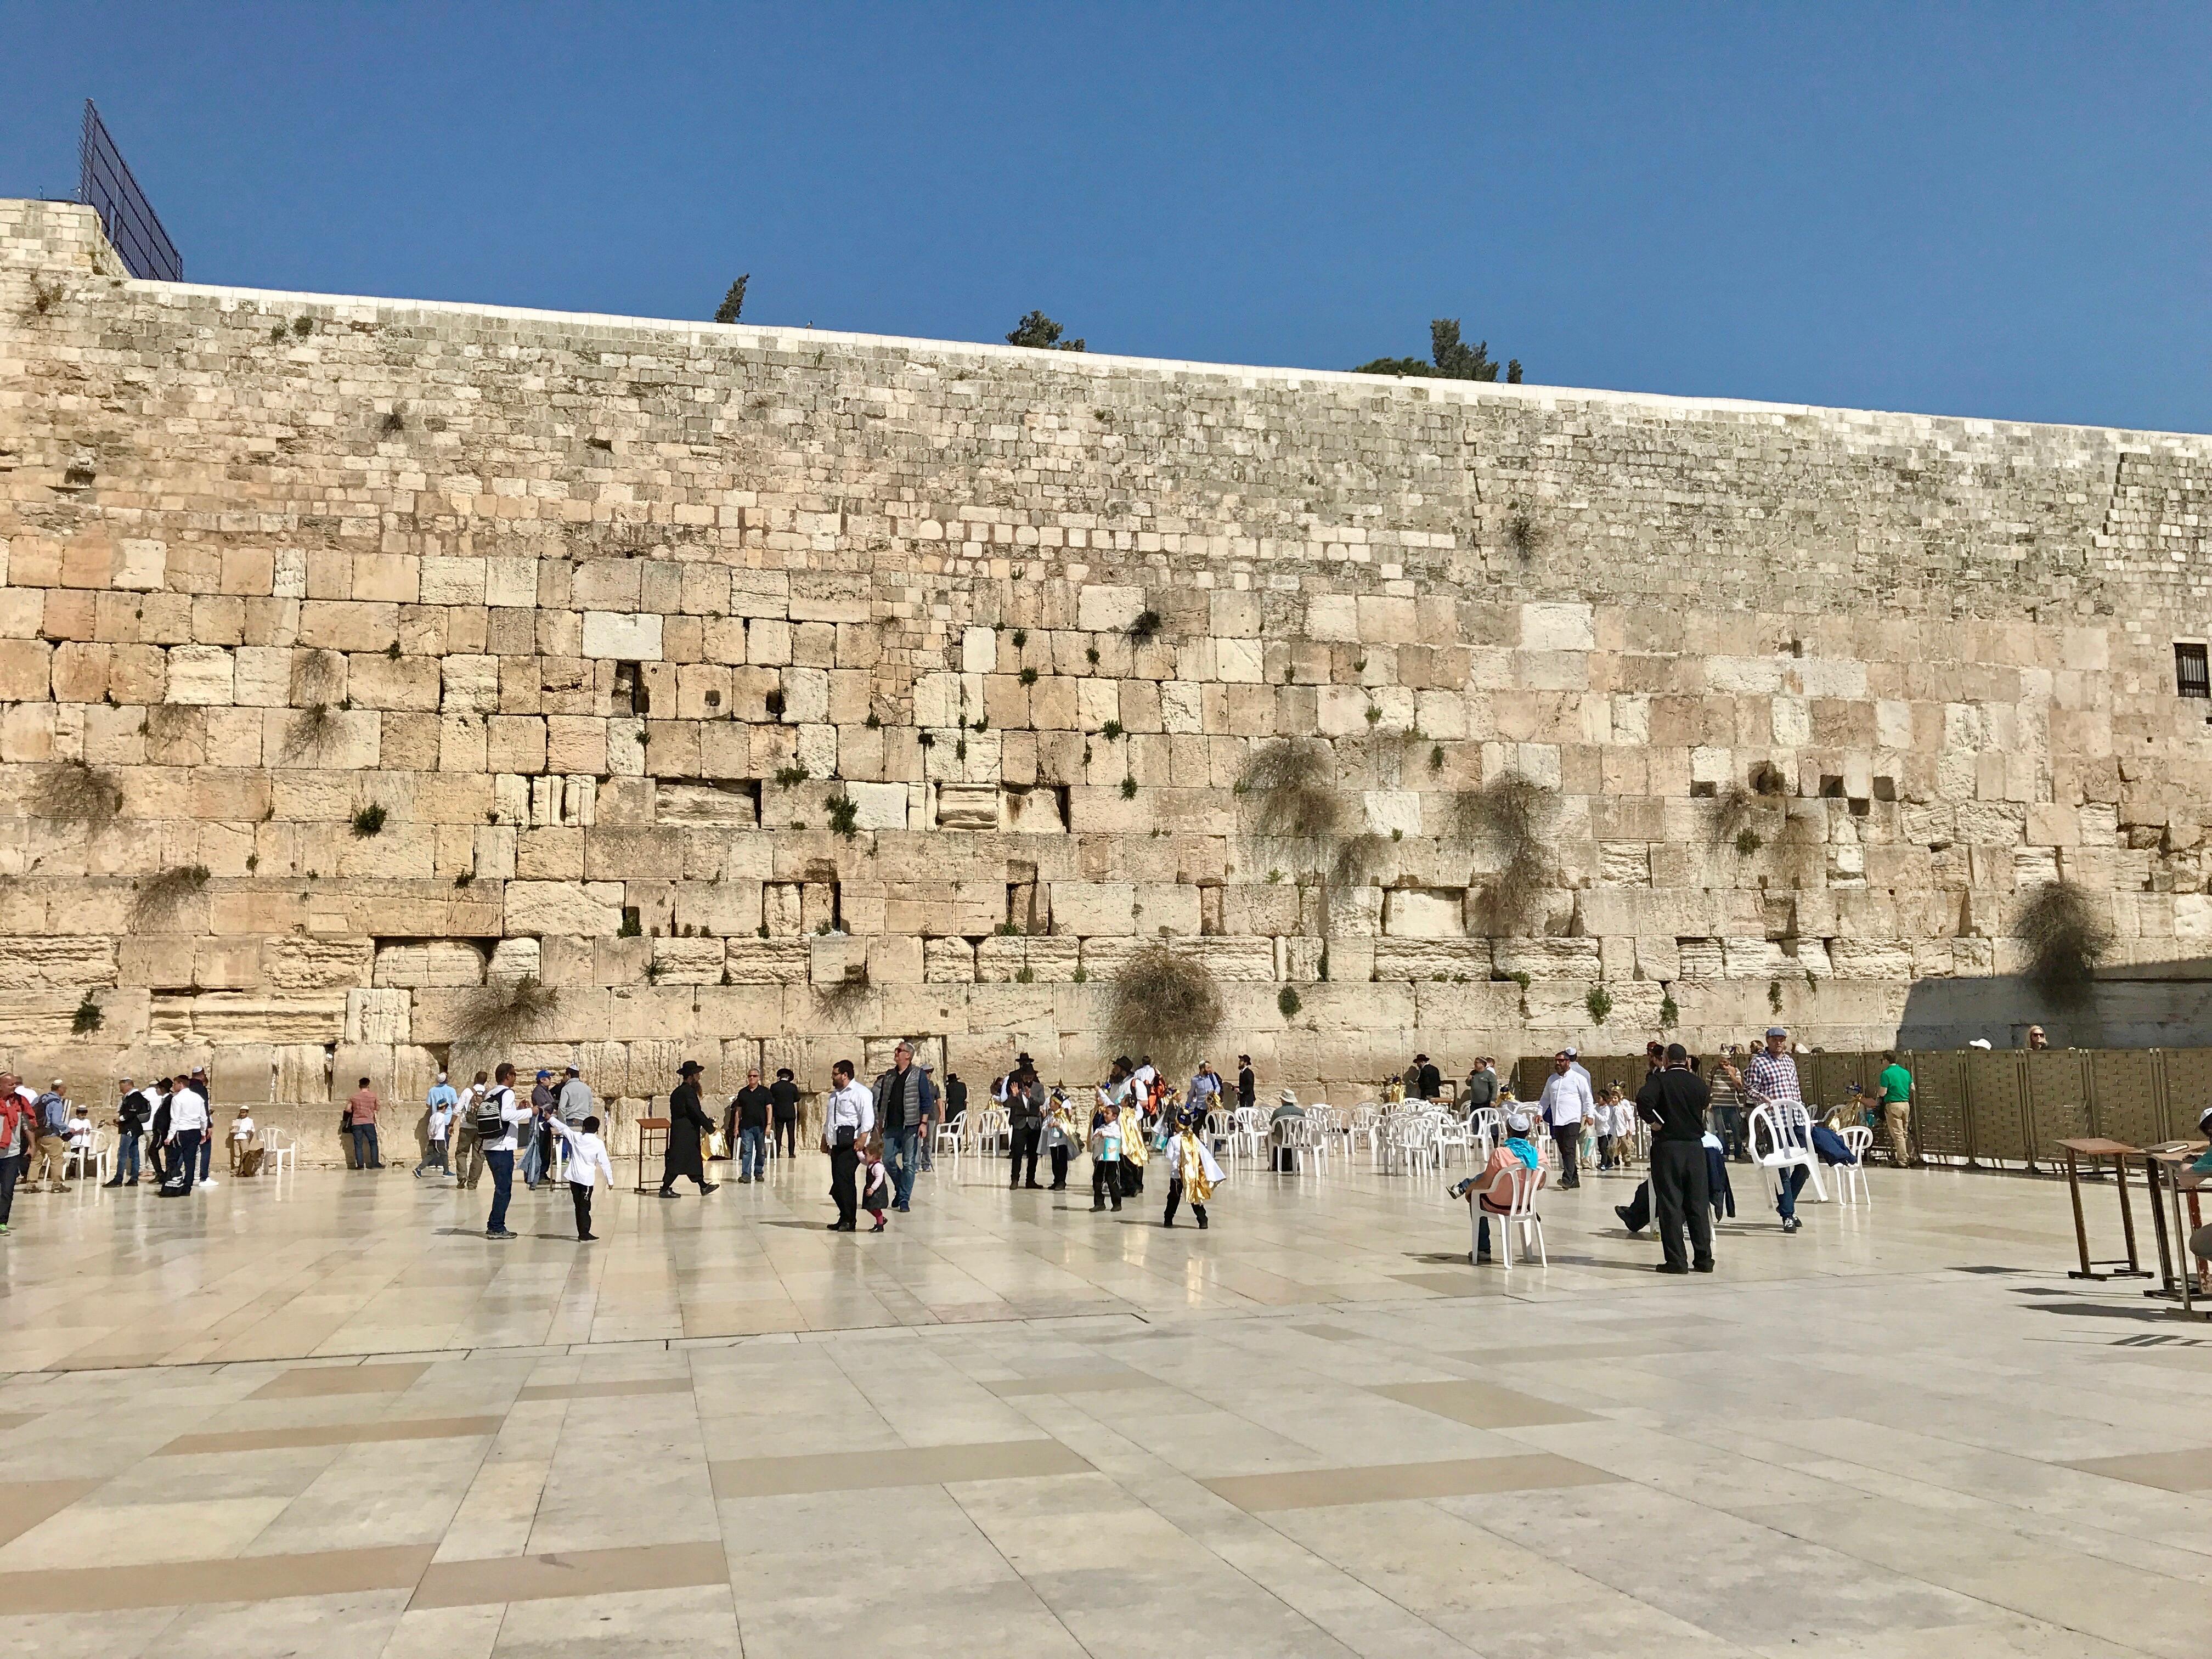 Visiting the Wailing Wall in Jerusalem's Old City